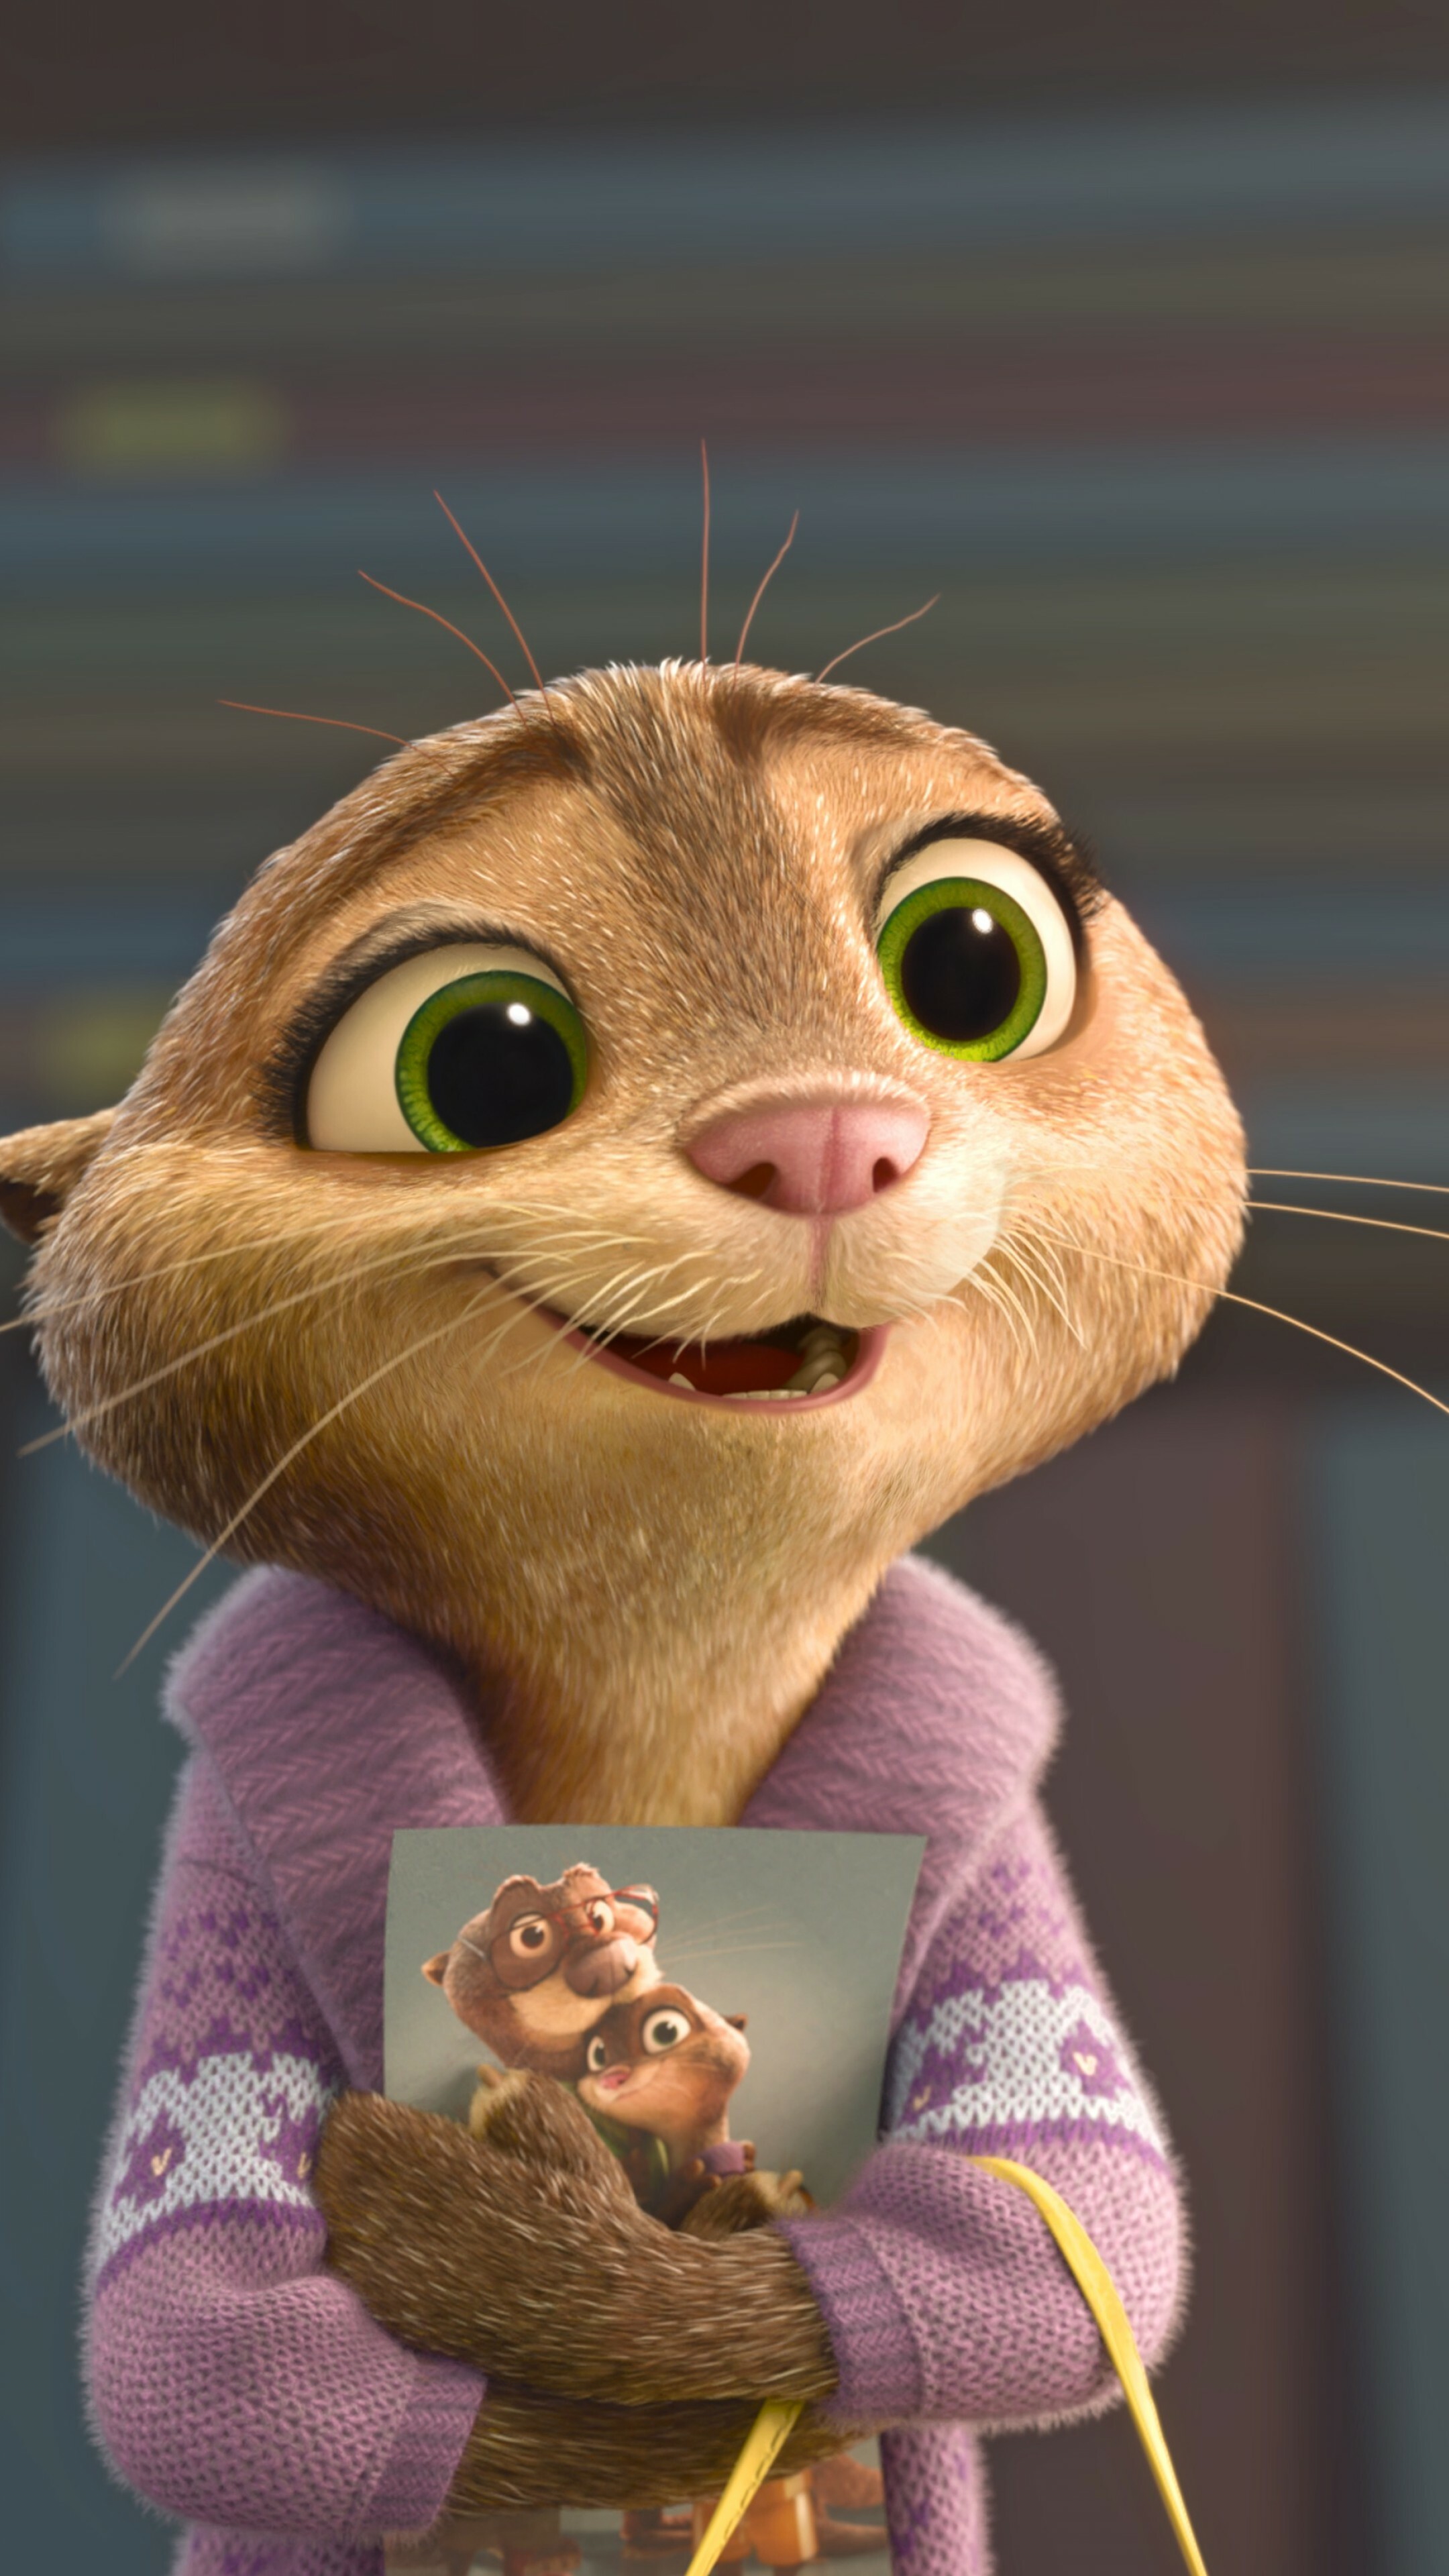 Zootopia: Octavia Spencer as Mrs. Otterton, A concerned North American river otter whose husband Emmitt has gone missing. 2160x3840 4K Wallpaper.